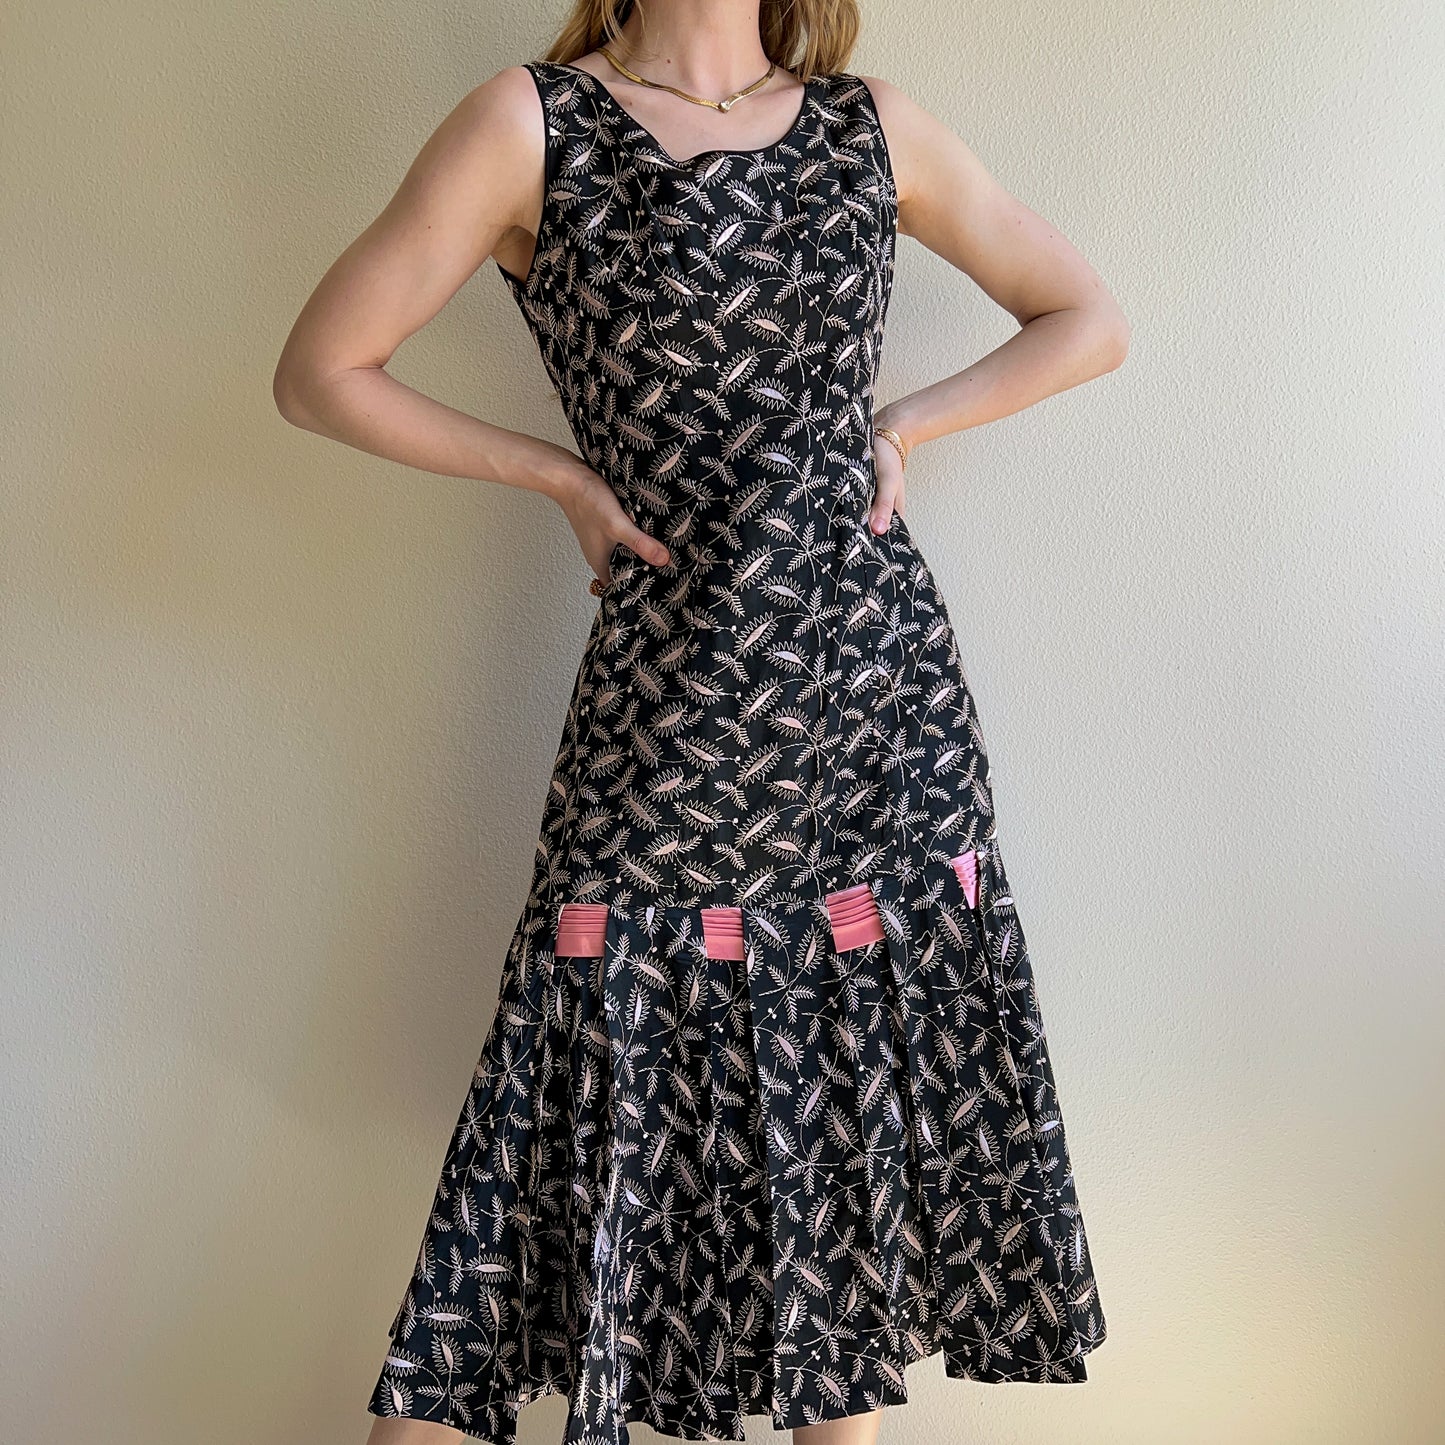 1950s Embroidered Cocktail Dress With Pink Ribbon (M)